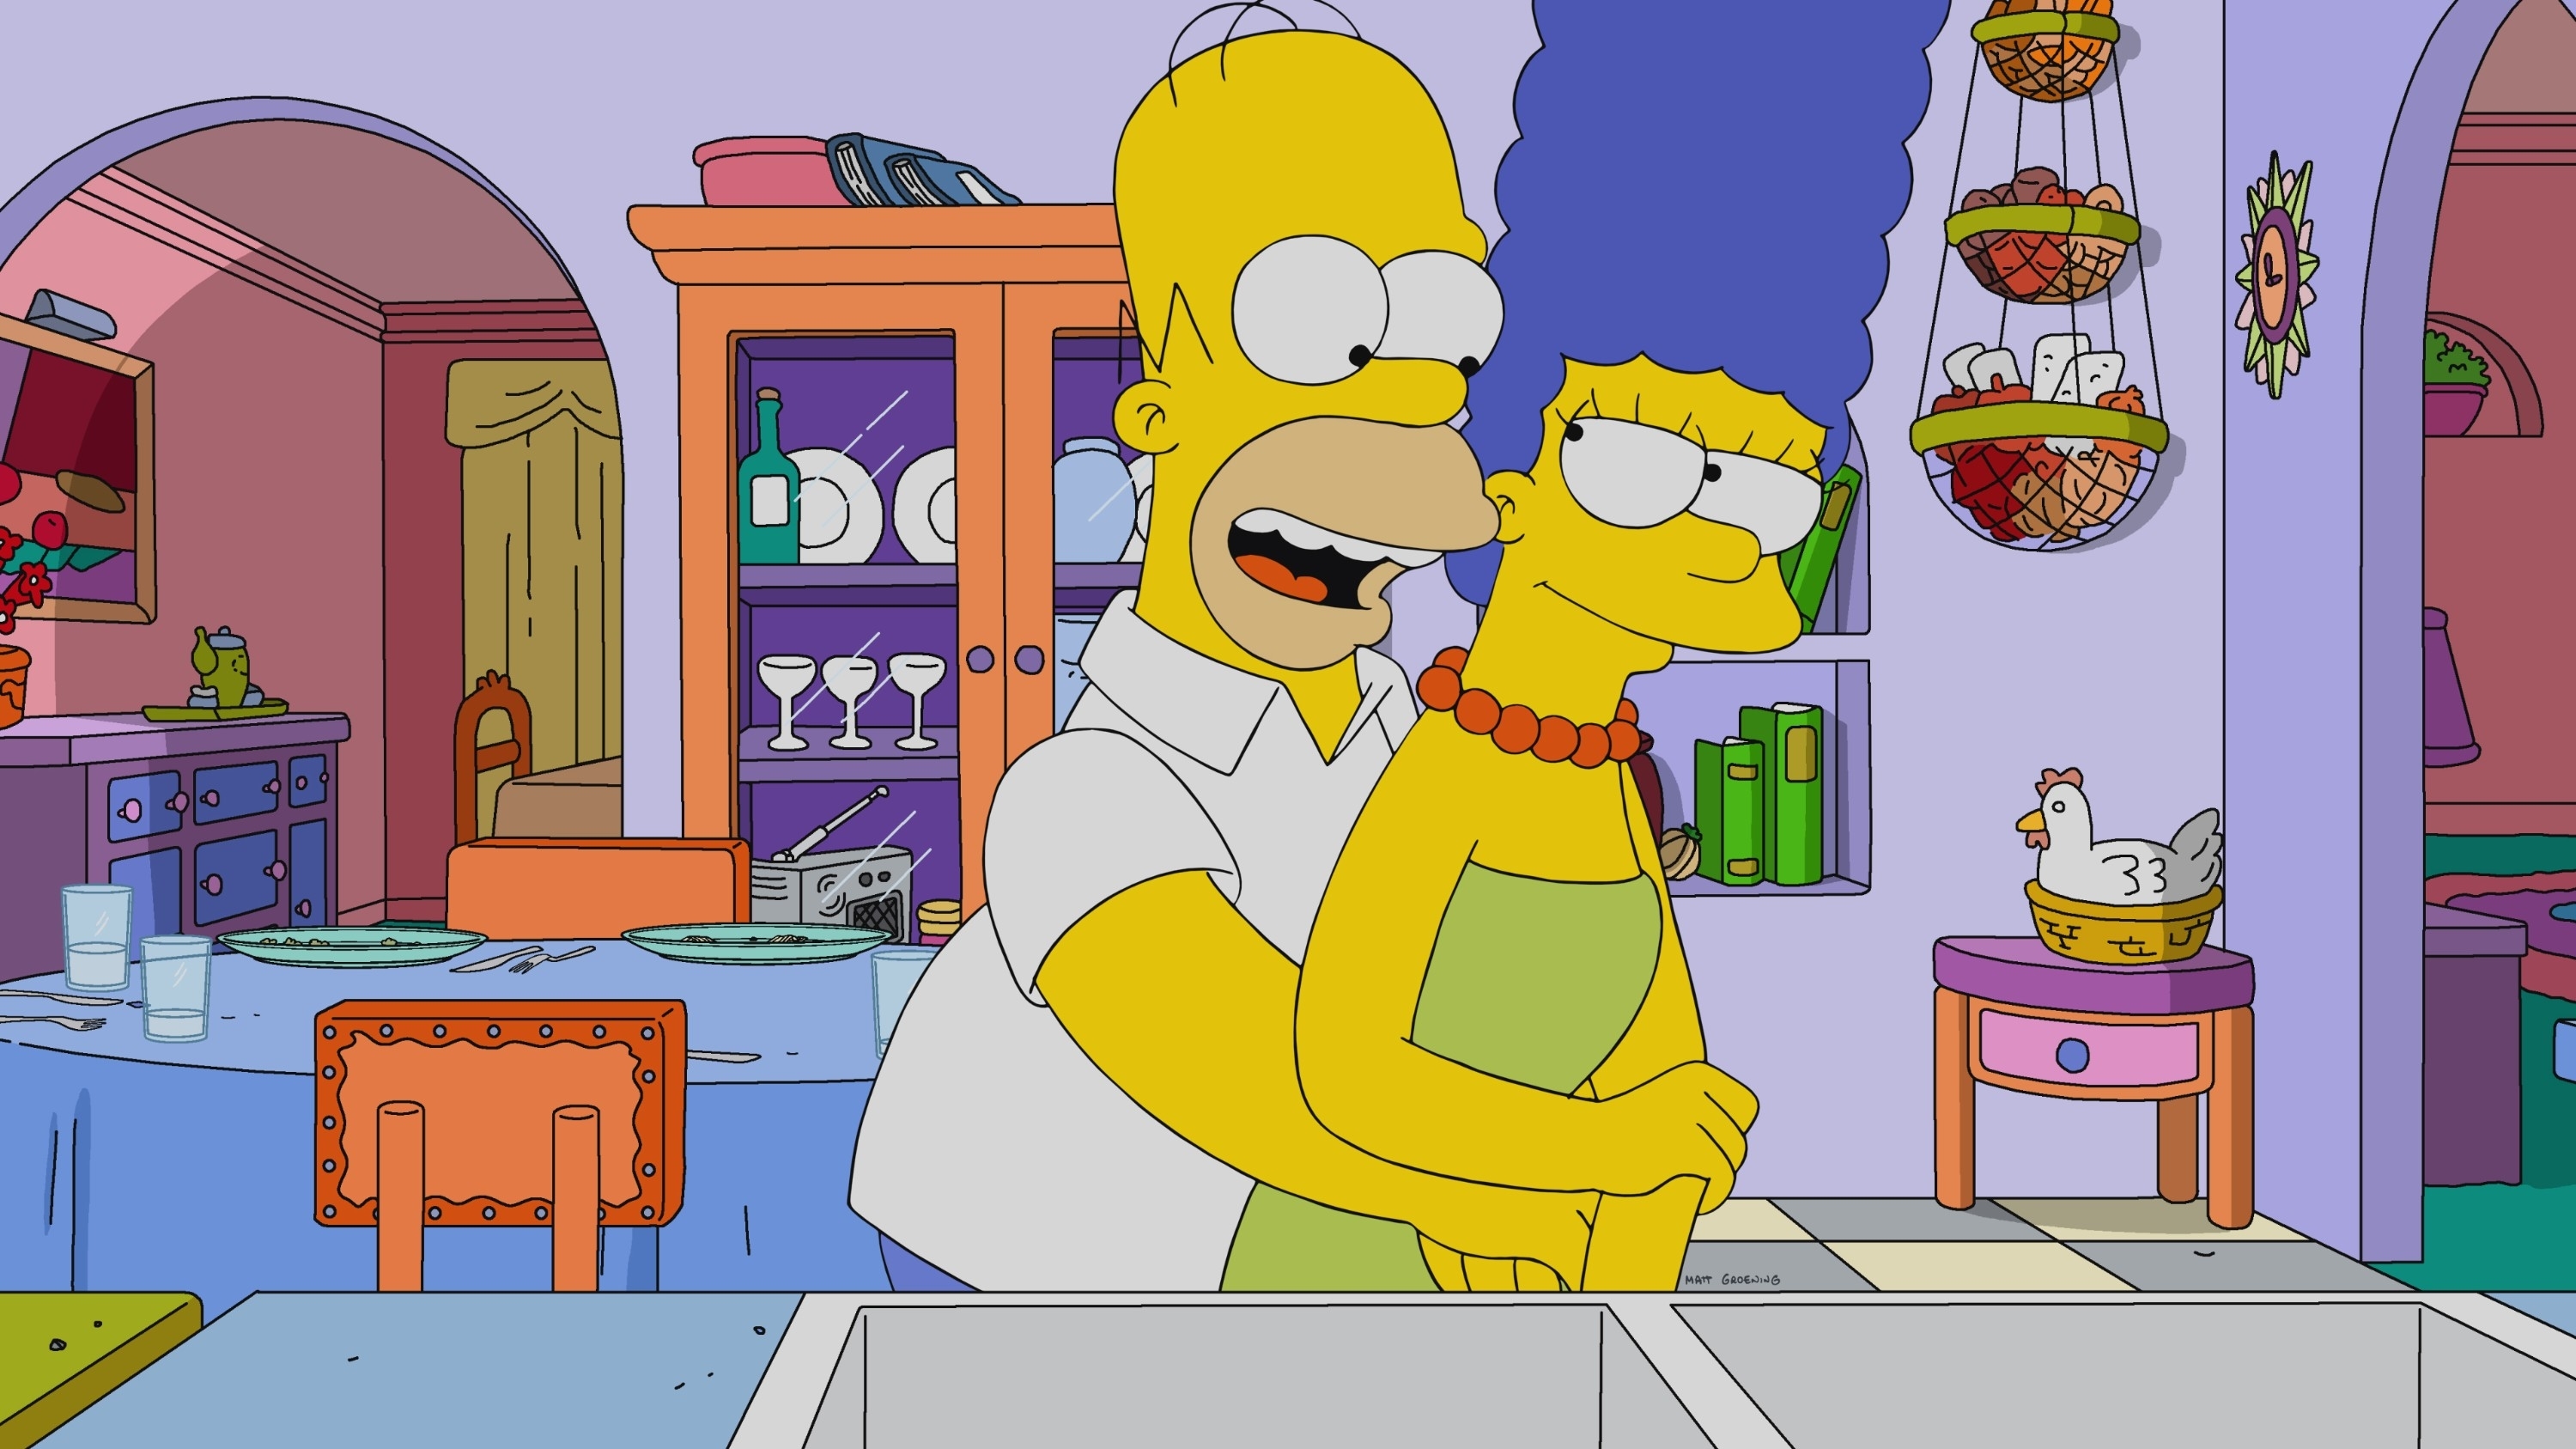 Homer and Marge Simpson in their kitchen with a smiling embrace